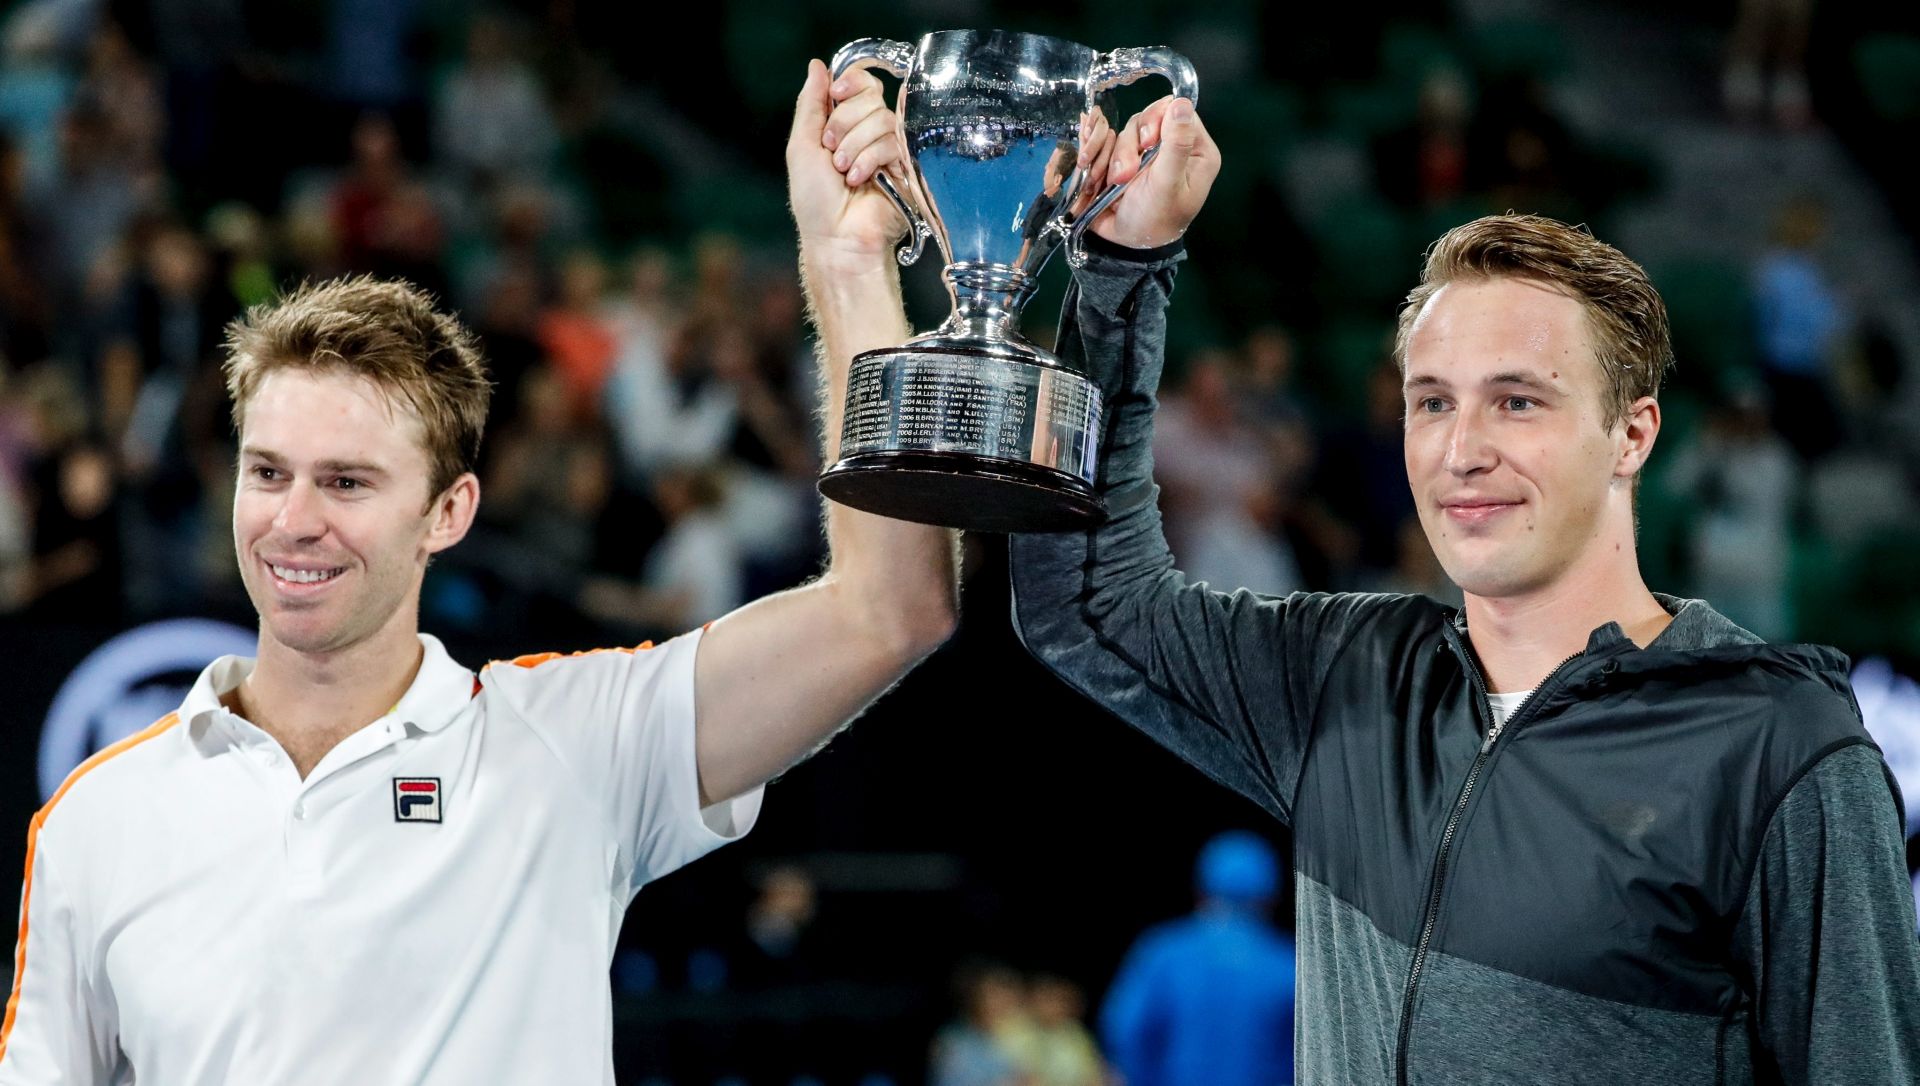 epa05756593 Finland's Henri Kontinen (R) and Australia's John Peers lift  the trophy after defeating Bob Bryan and Mike Bryan of theUnited States in the  Men's Doubles final at the Australian Open Grand Slam tennis tournament in Melbourne, Victoria, Australia, 28 January 2017.  EPA/MADE NAGI